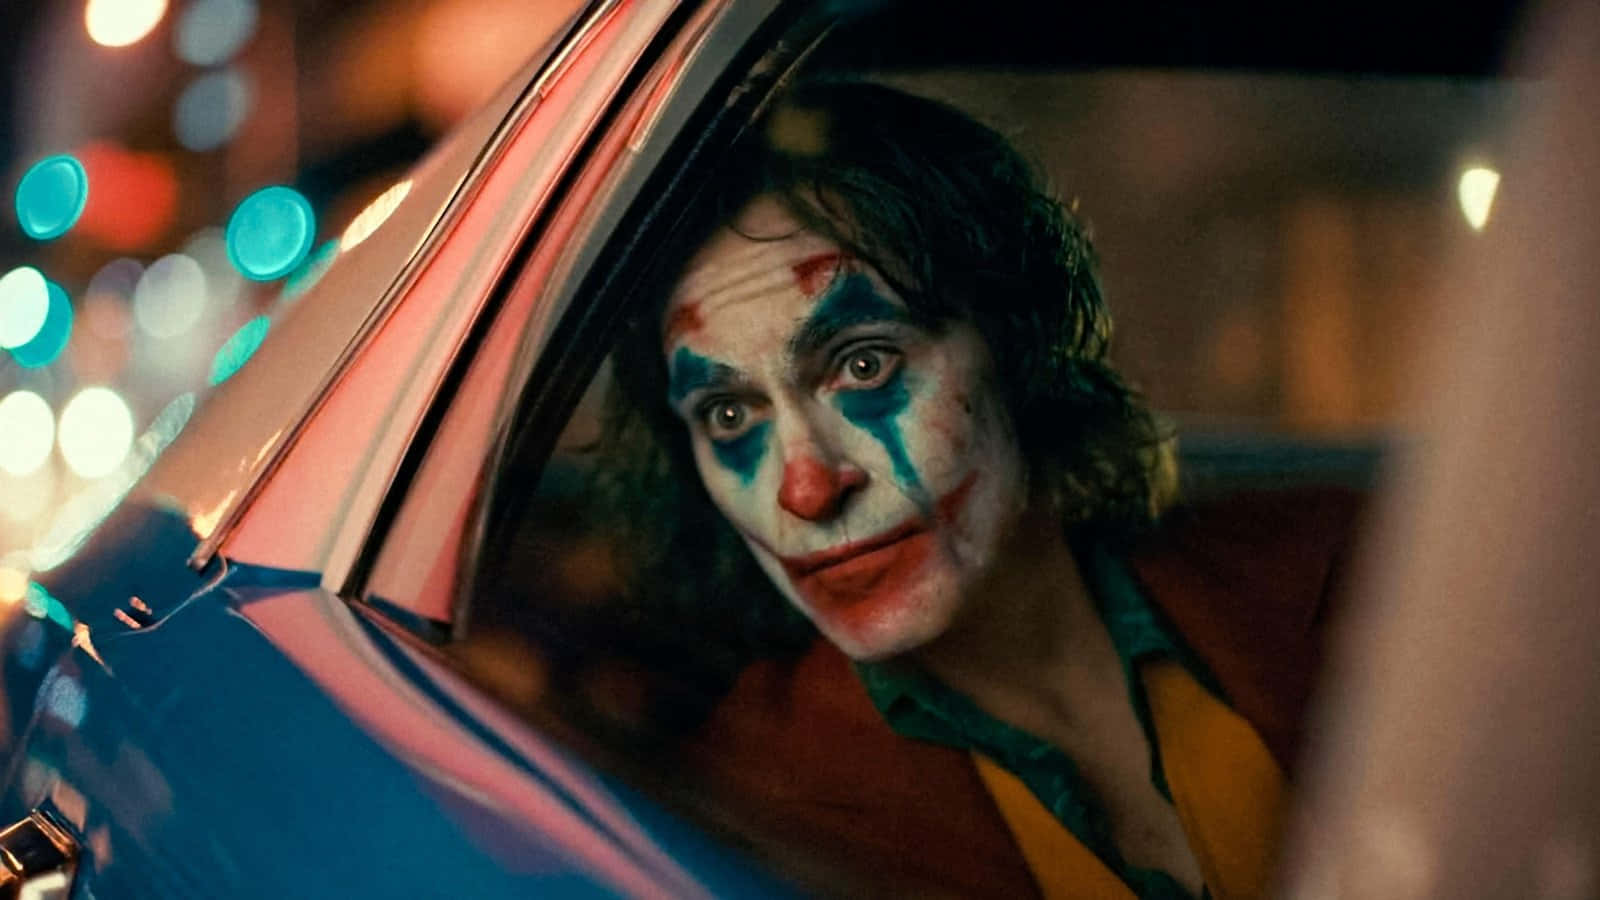 “We live in a society where the corrupt run wild and the Joker is the only one with a sense of justice.”